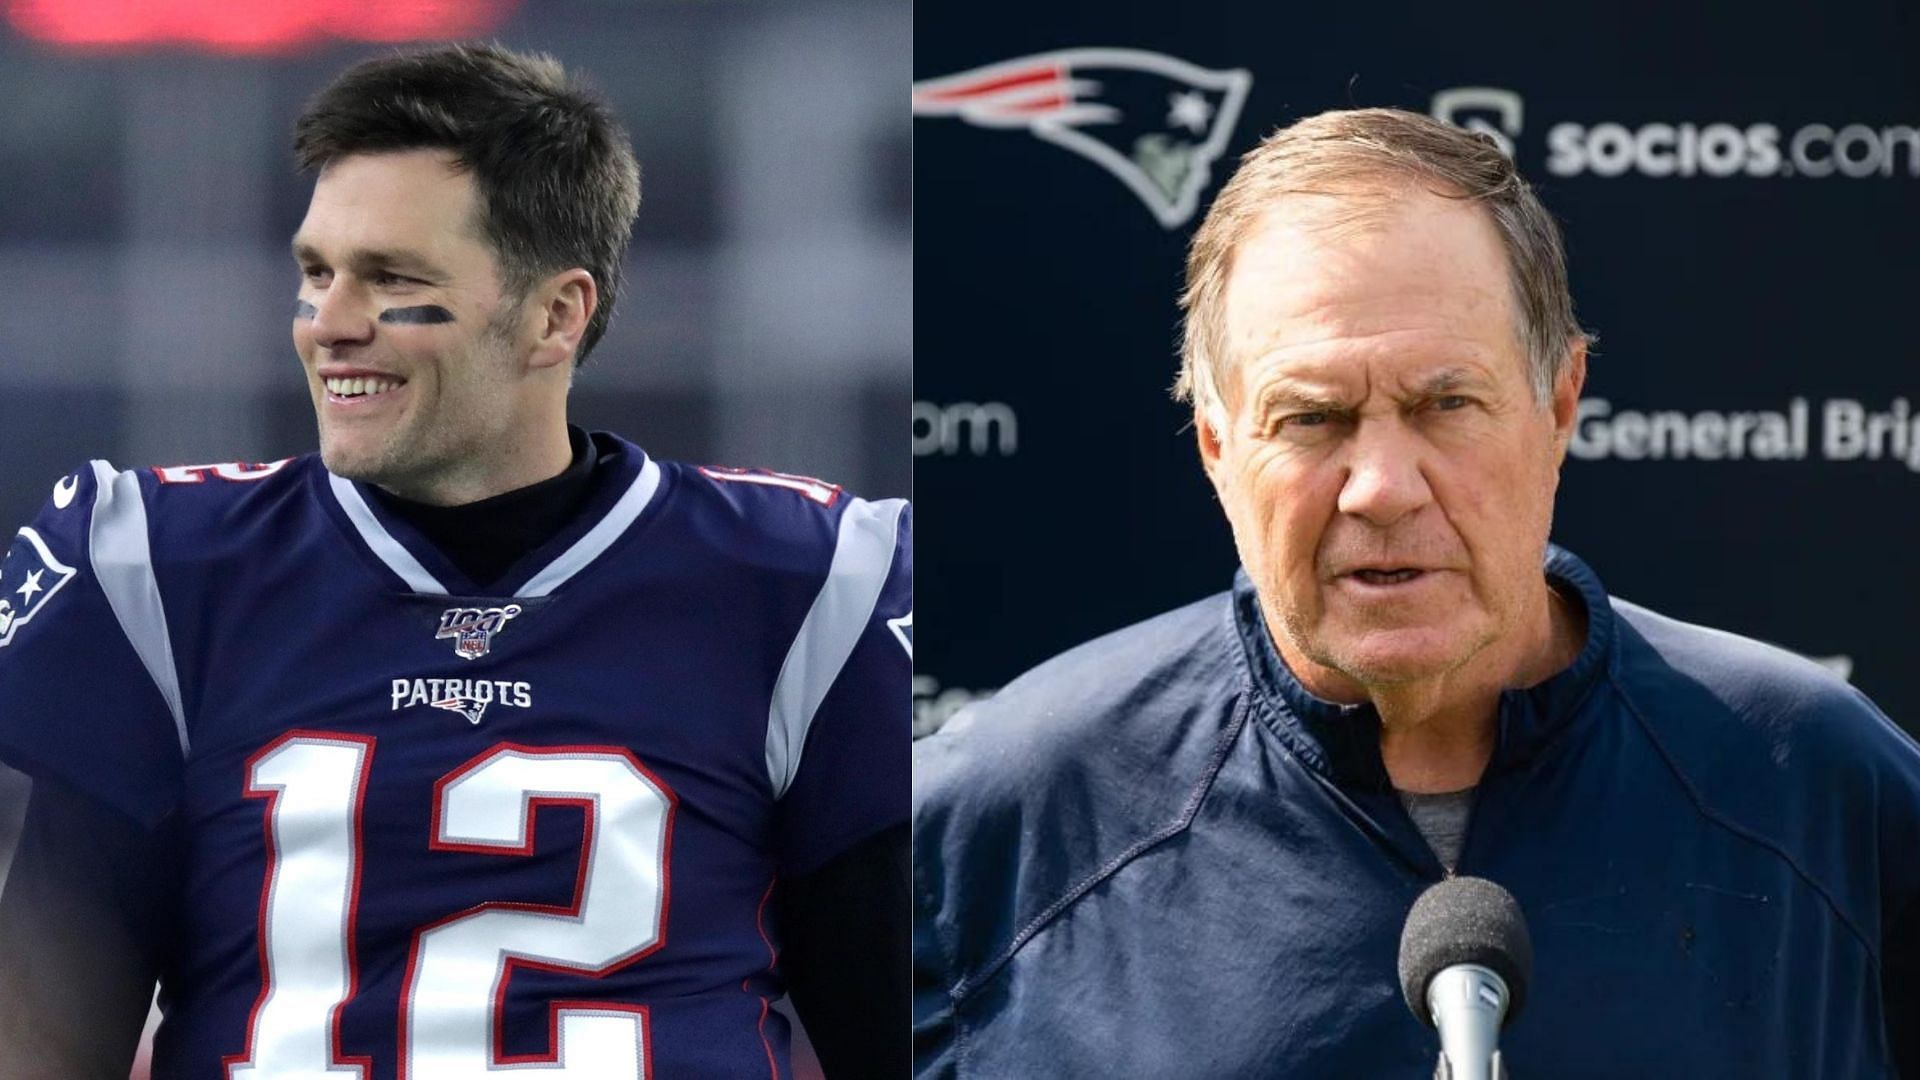 NFL fans on Bill Belichick (R) and the Patriots getting fined $50K for a league violation